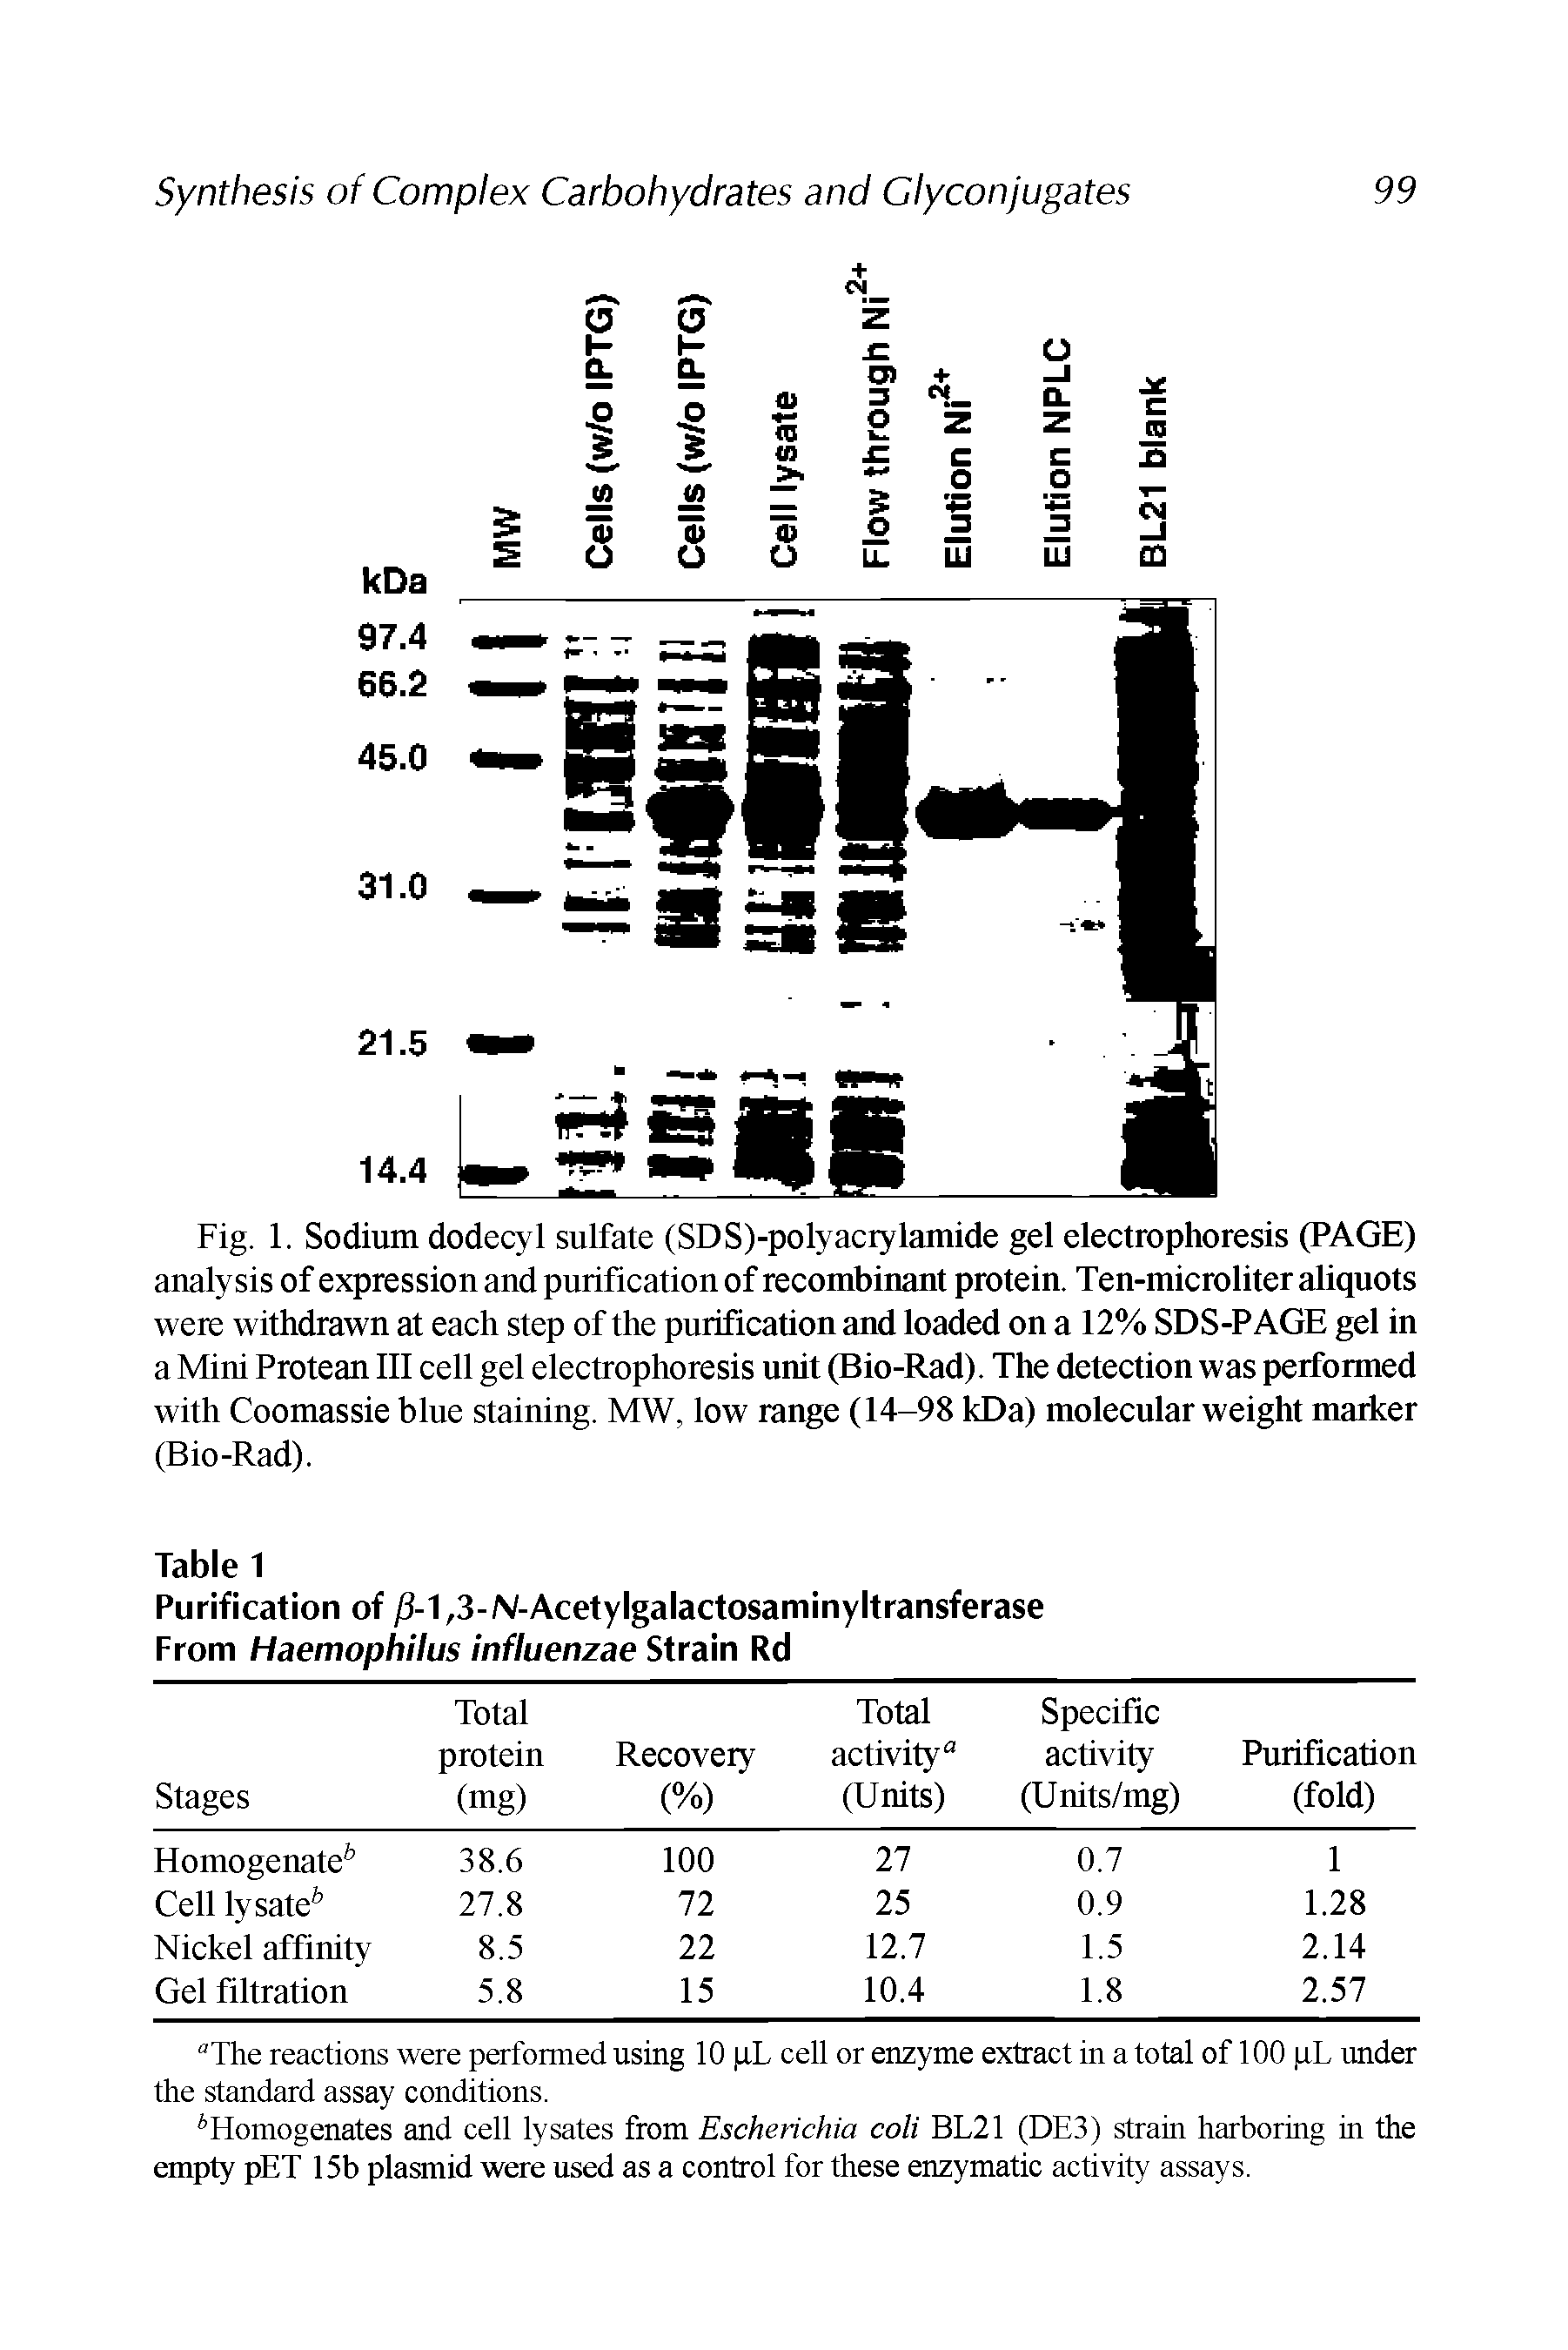 Fig. 1. Sodium dodecyl sulfate (SDS)-polyacrylamide gel electrophoresis (PAGE) analysis of expression and purification of recombinant protein. Ten-microliter aliquots were withdrawn at each step of the purification and loaded on a 12% SDS-PAGE gel in a Mini Protean III cell gel electrophoresis unit (Bio-Rad). The detection was performed with Coomassie blue staining. MW, low range (14-98 kDa) molecular weight marker (Bio-Rad).